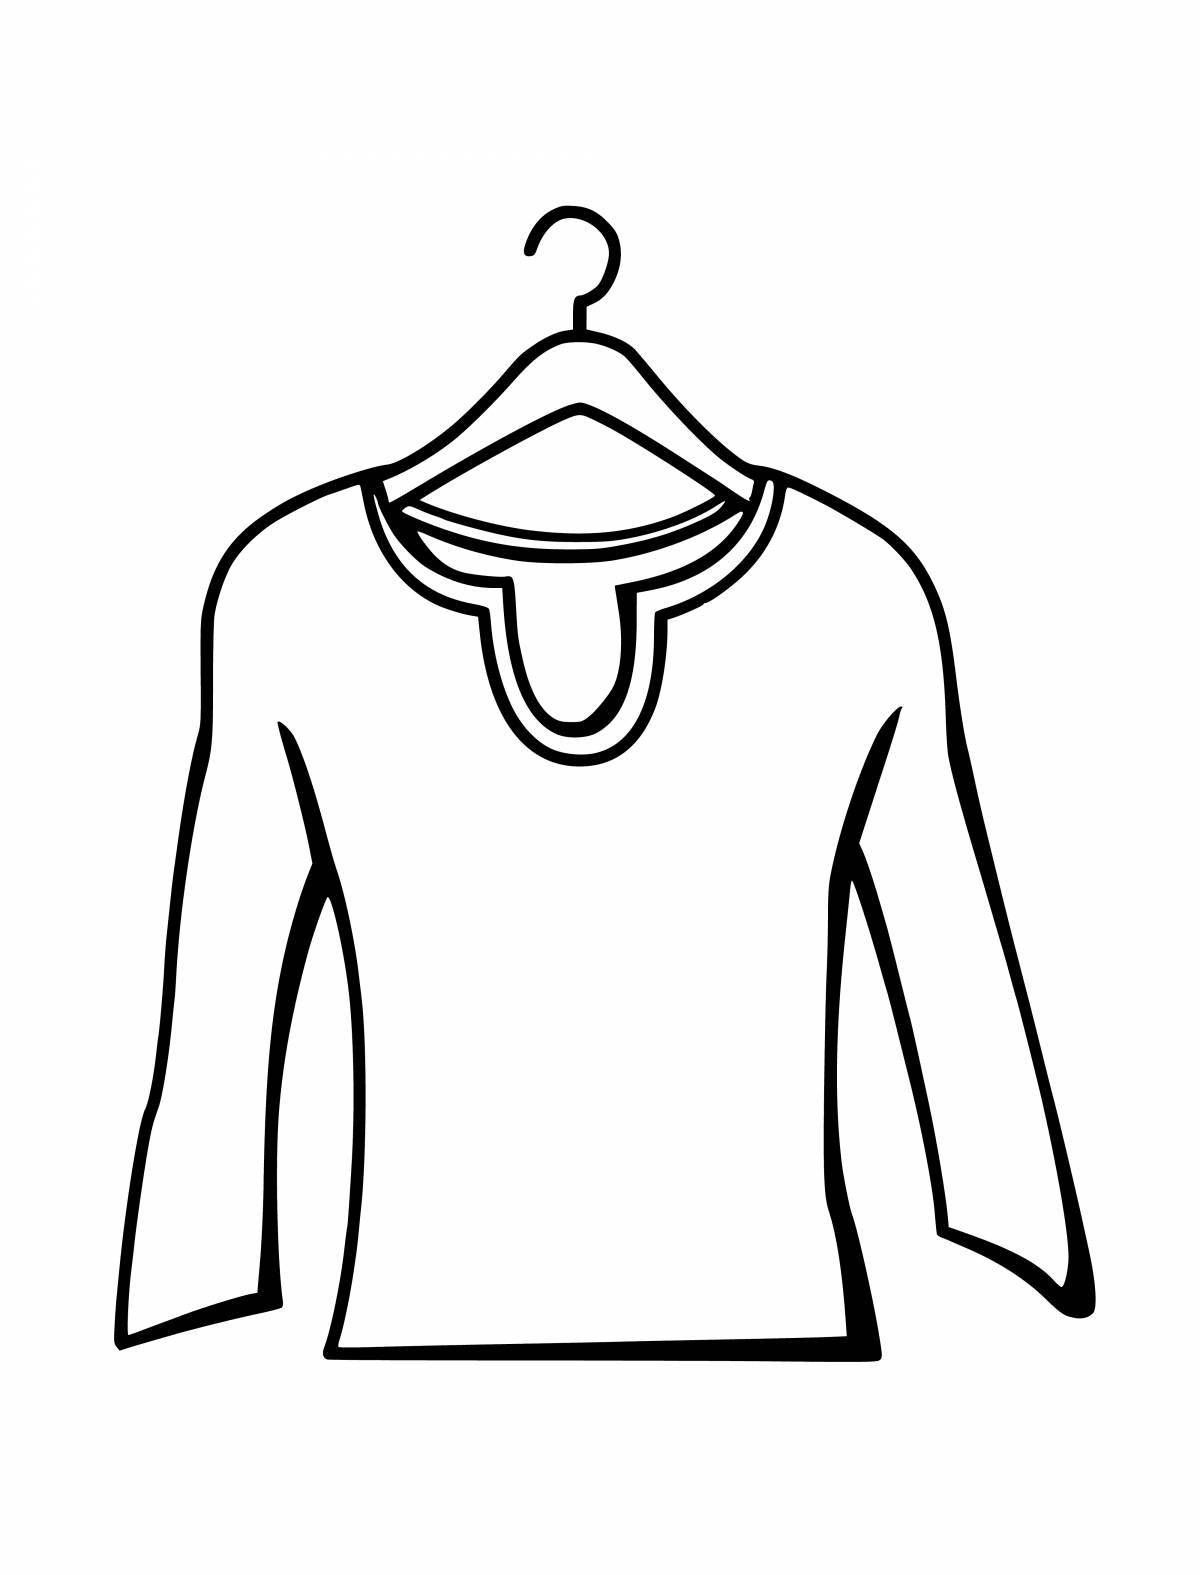 Cozy sweater coloring page